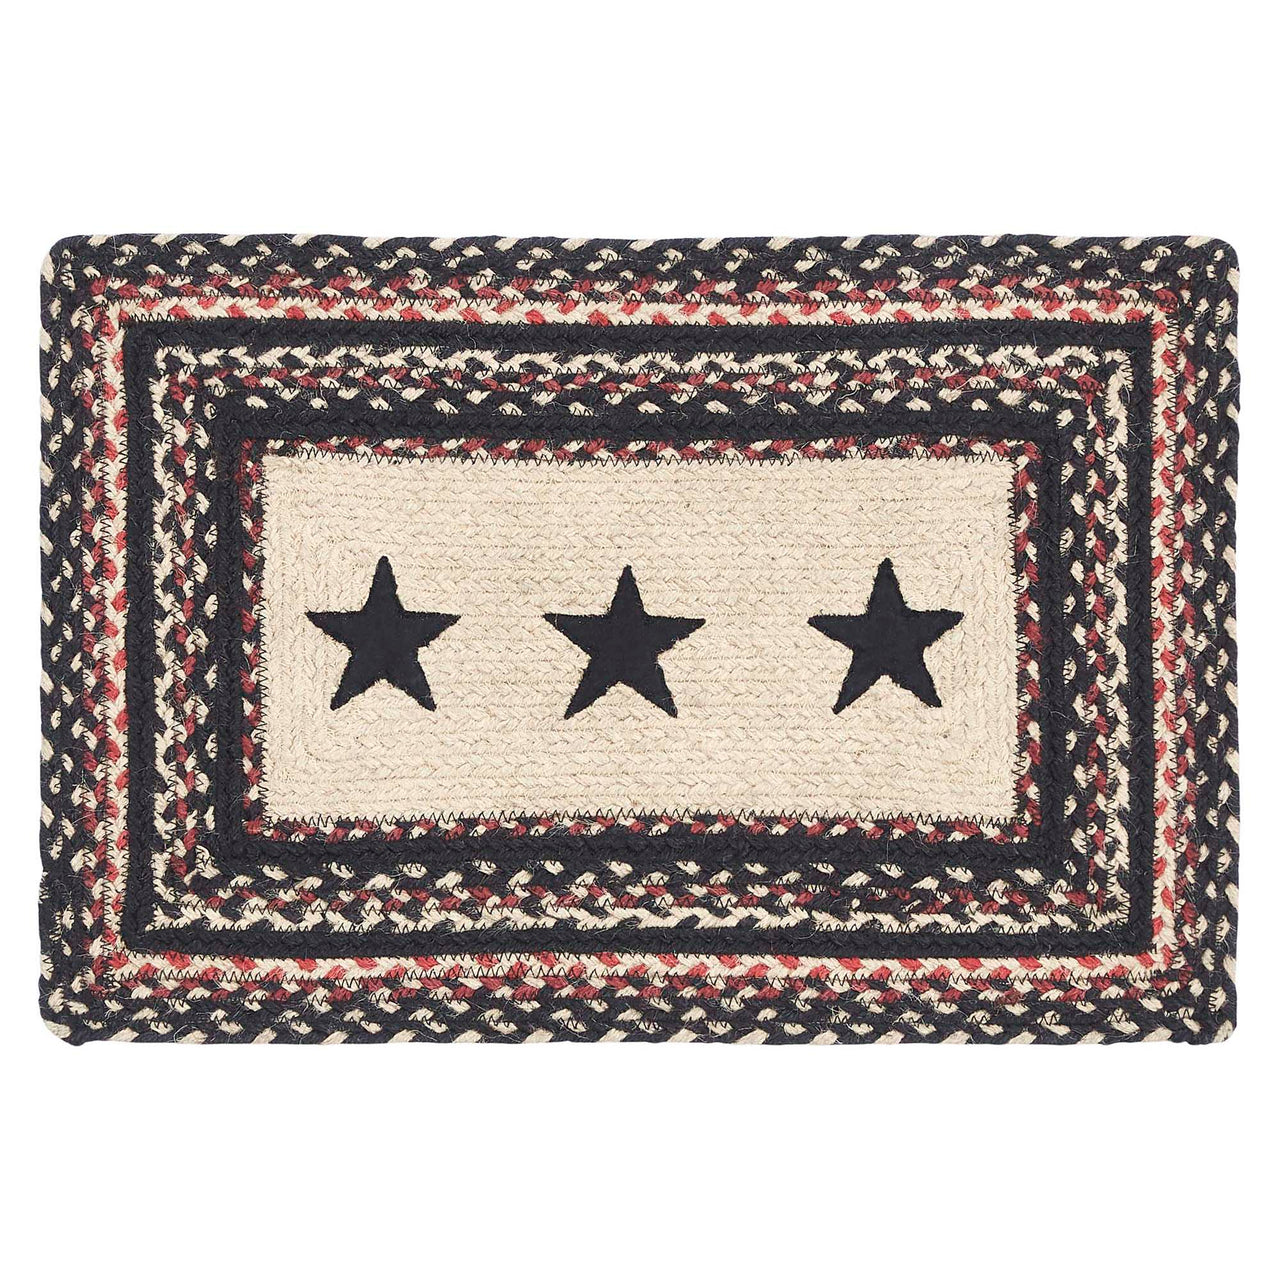 Colonial Star Jute Braided Rect Placemat 12"x18" VHC Brands